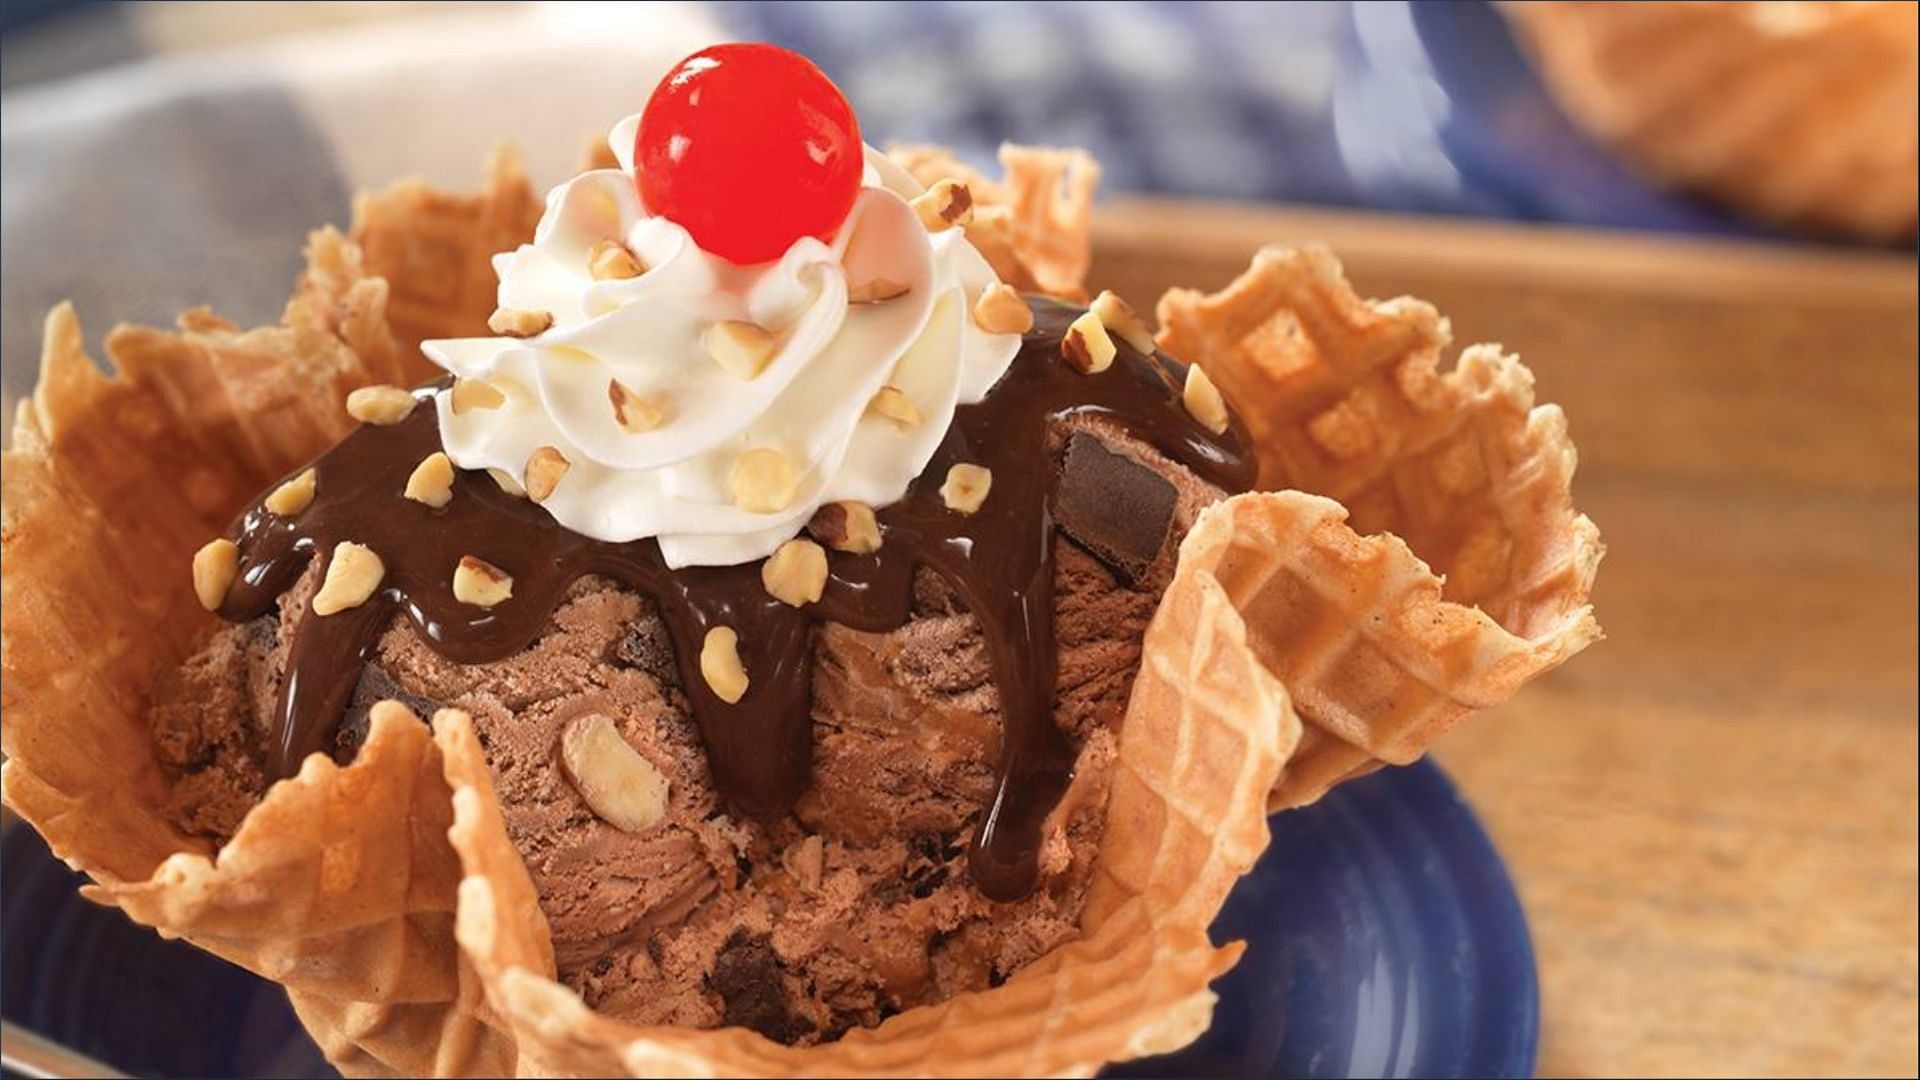 The German Chocolate Cake Ice Cream can be found in participating stores across the United States starting September 14 and onwards (Image via Baskin Robbins)